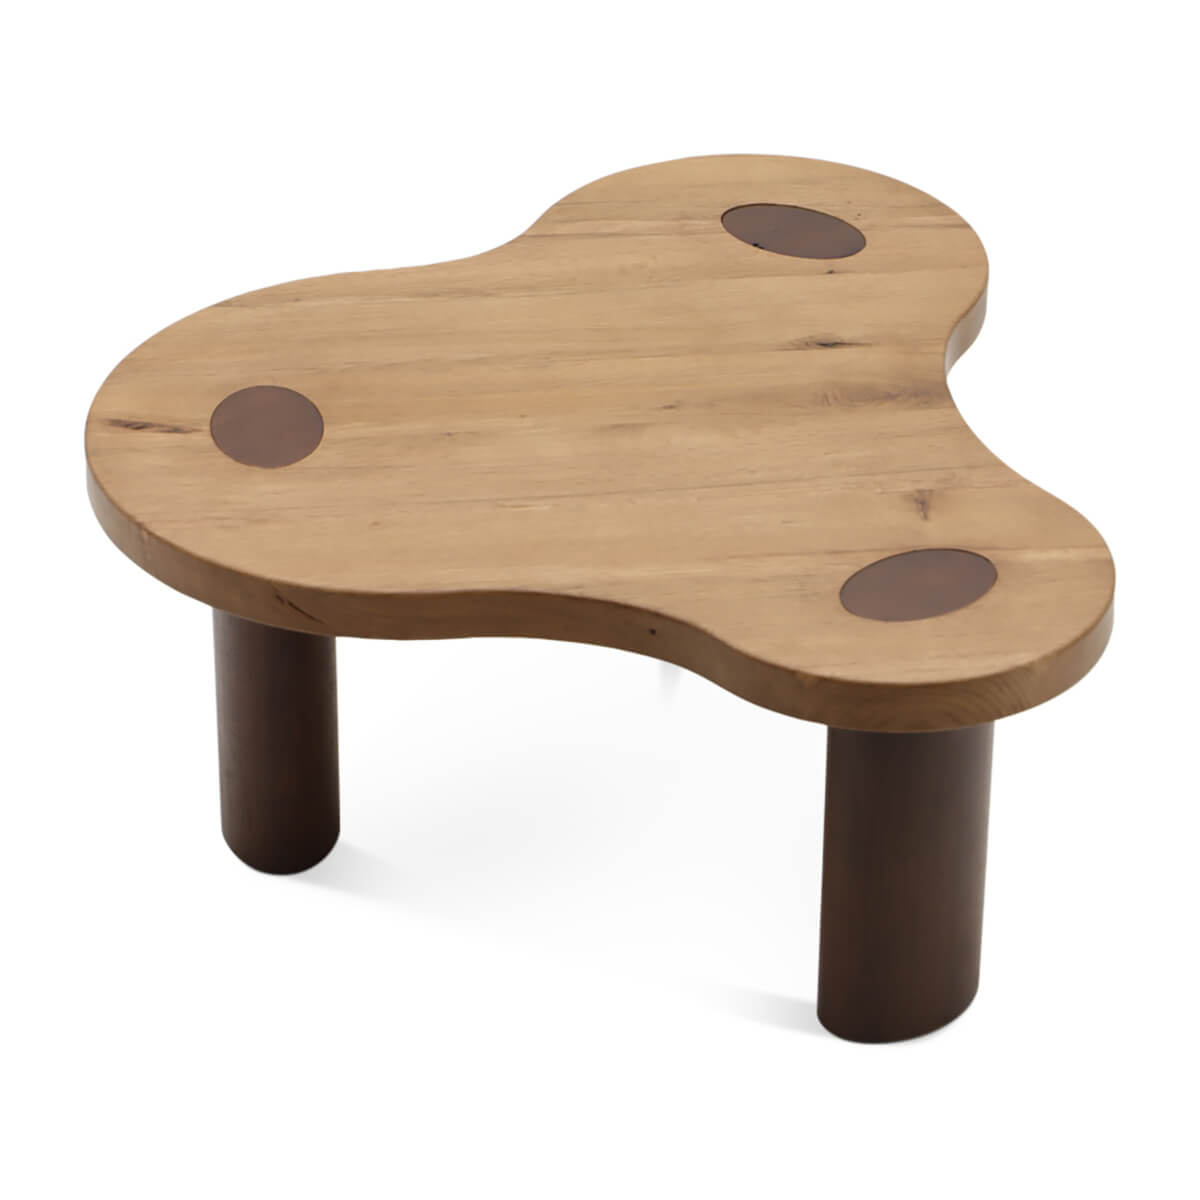 Amelie Wood Freeform Cloud Coffee Table - Small / Solid Oak with Walnut Stain